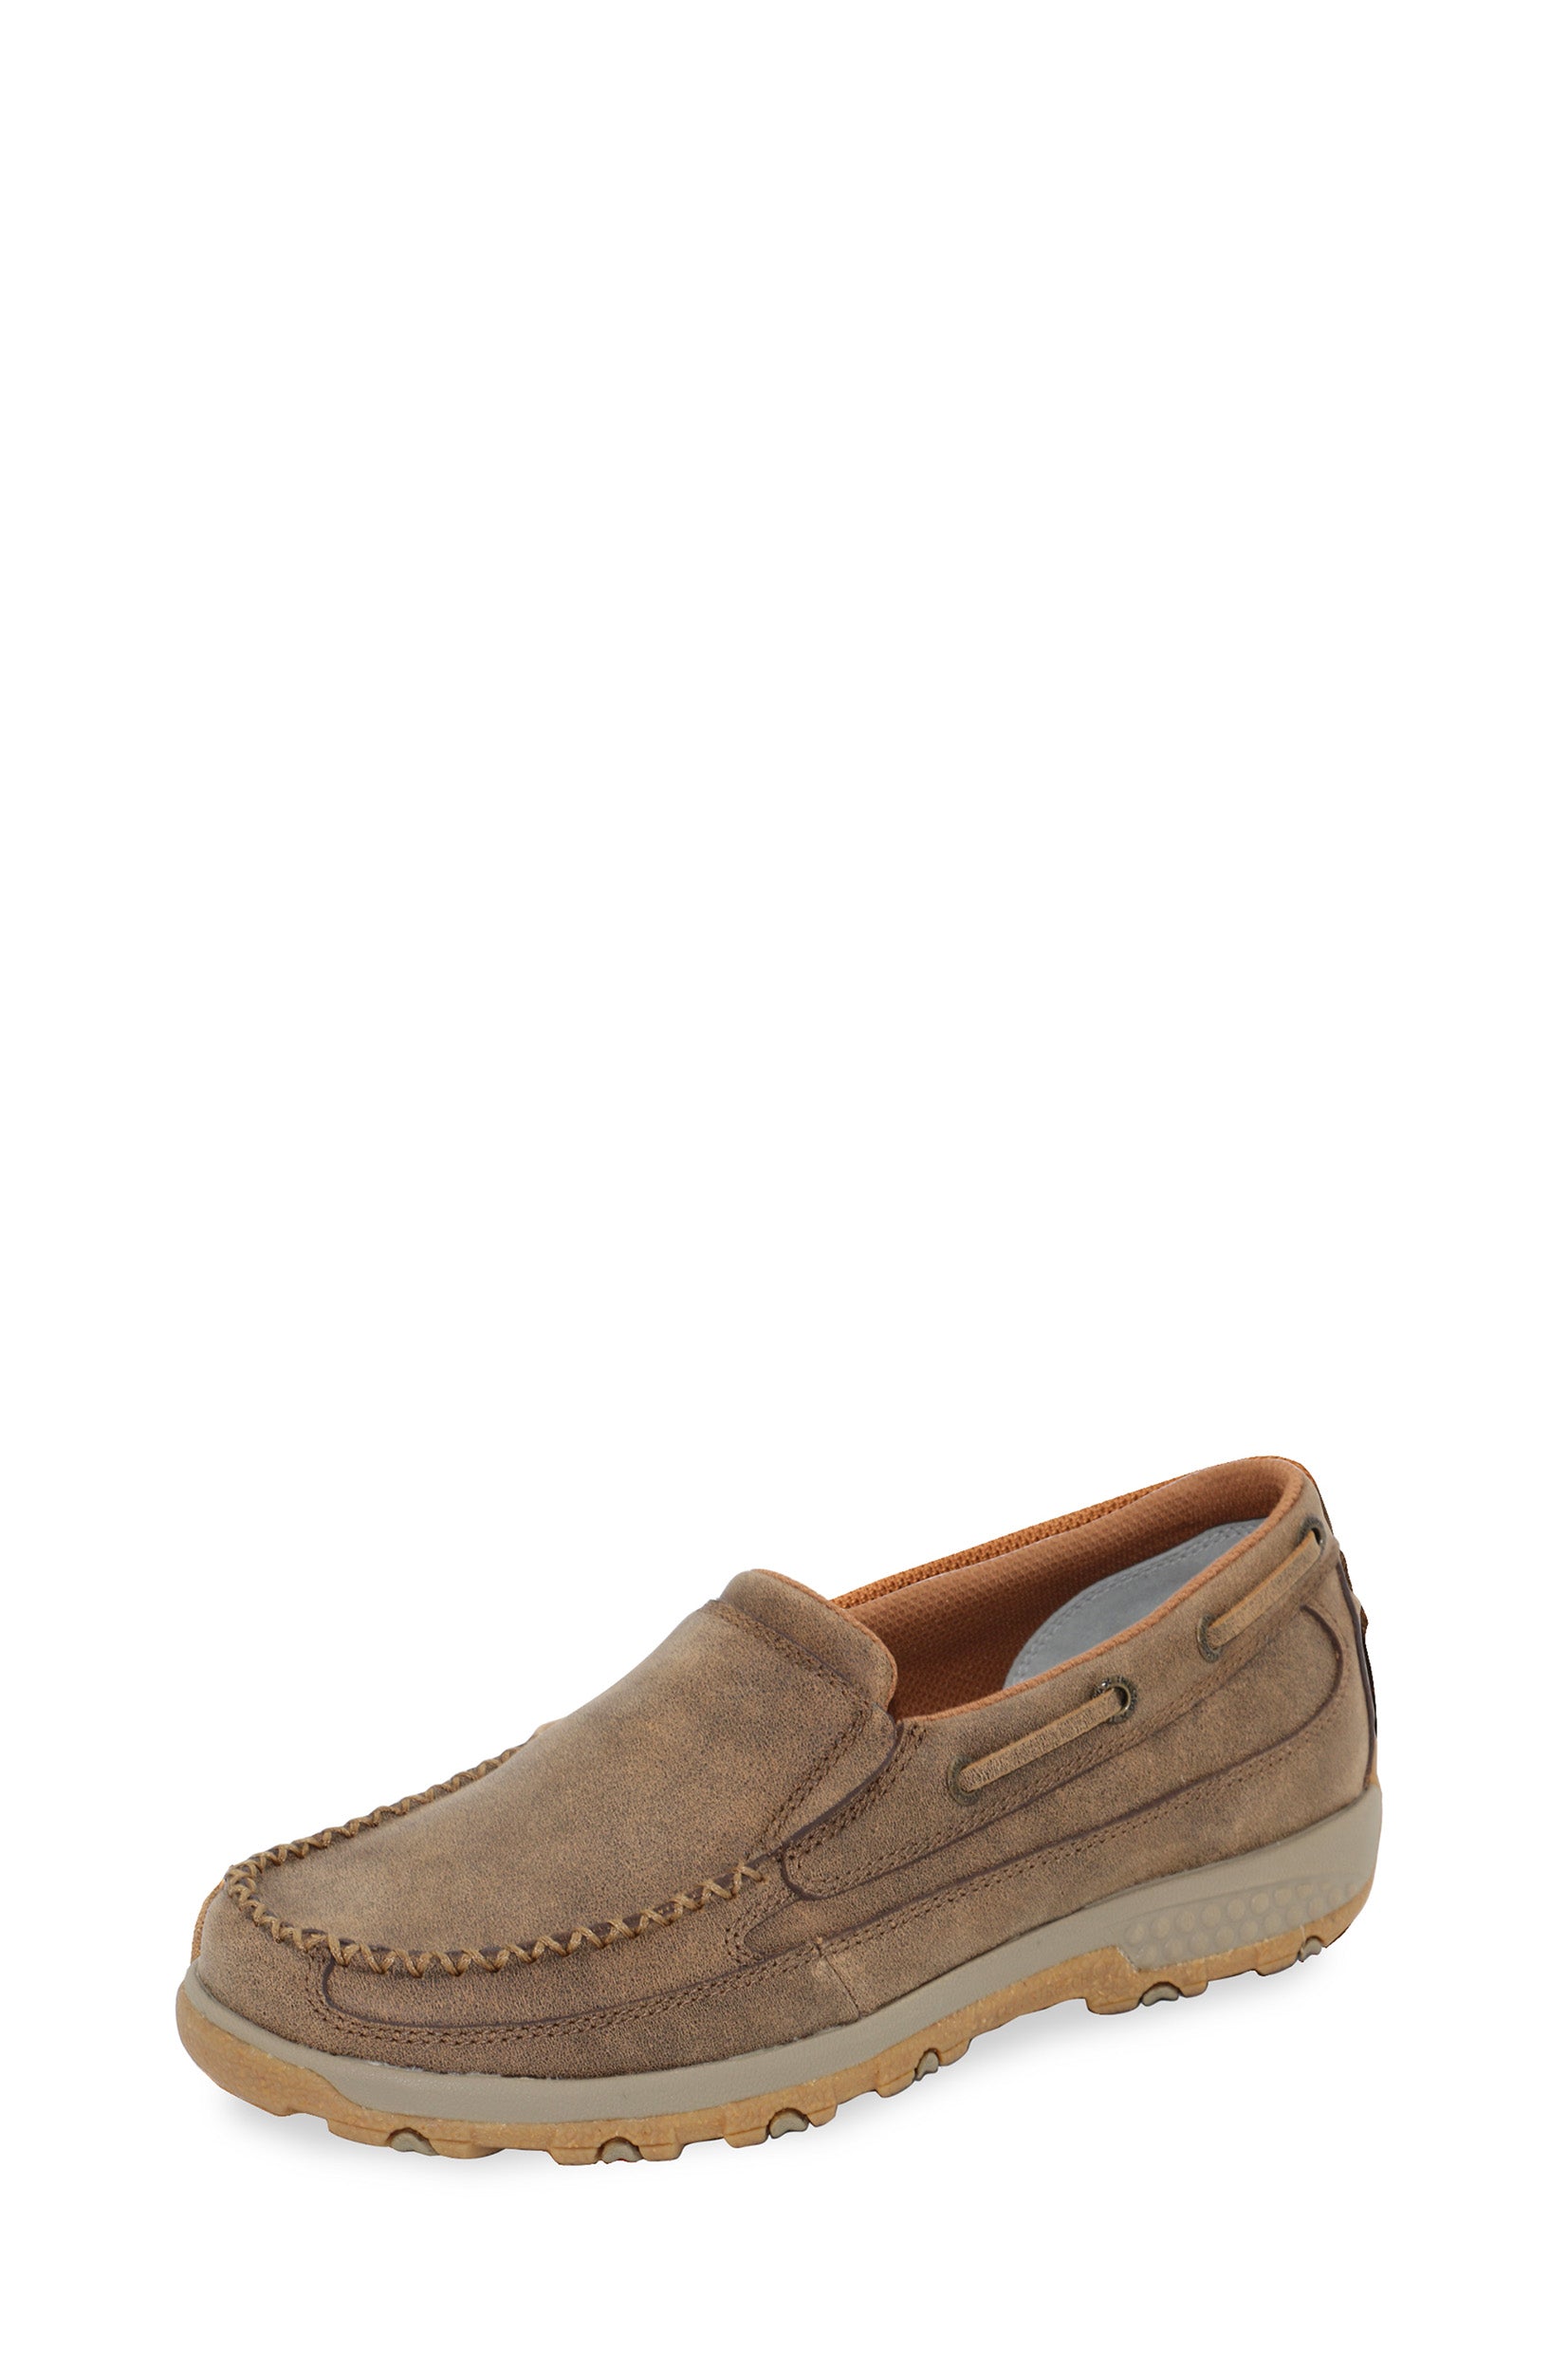 Twisted X Wmns Cellstretch Mocs Slip On - New Year Clearance